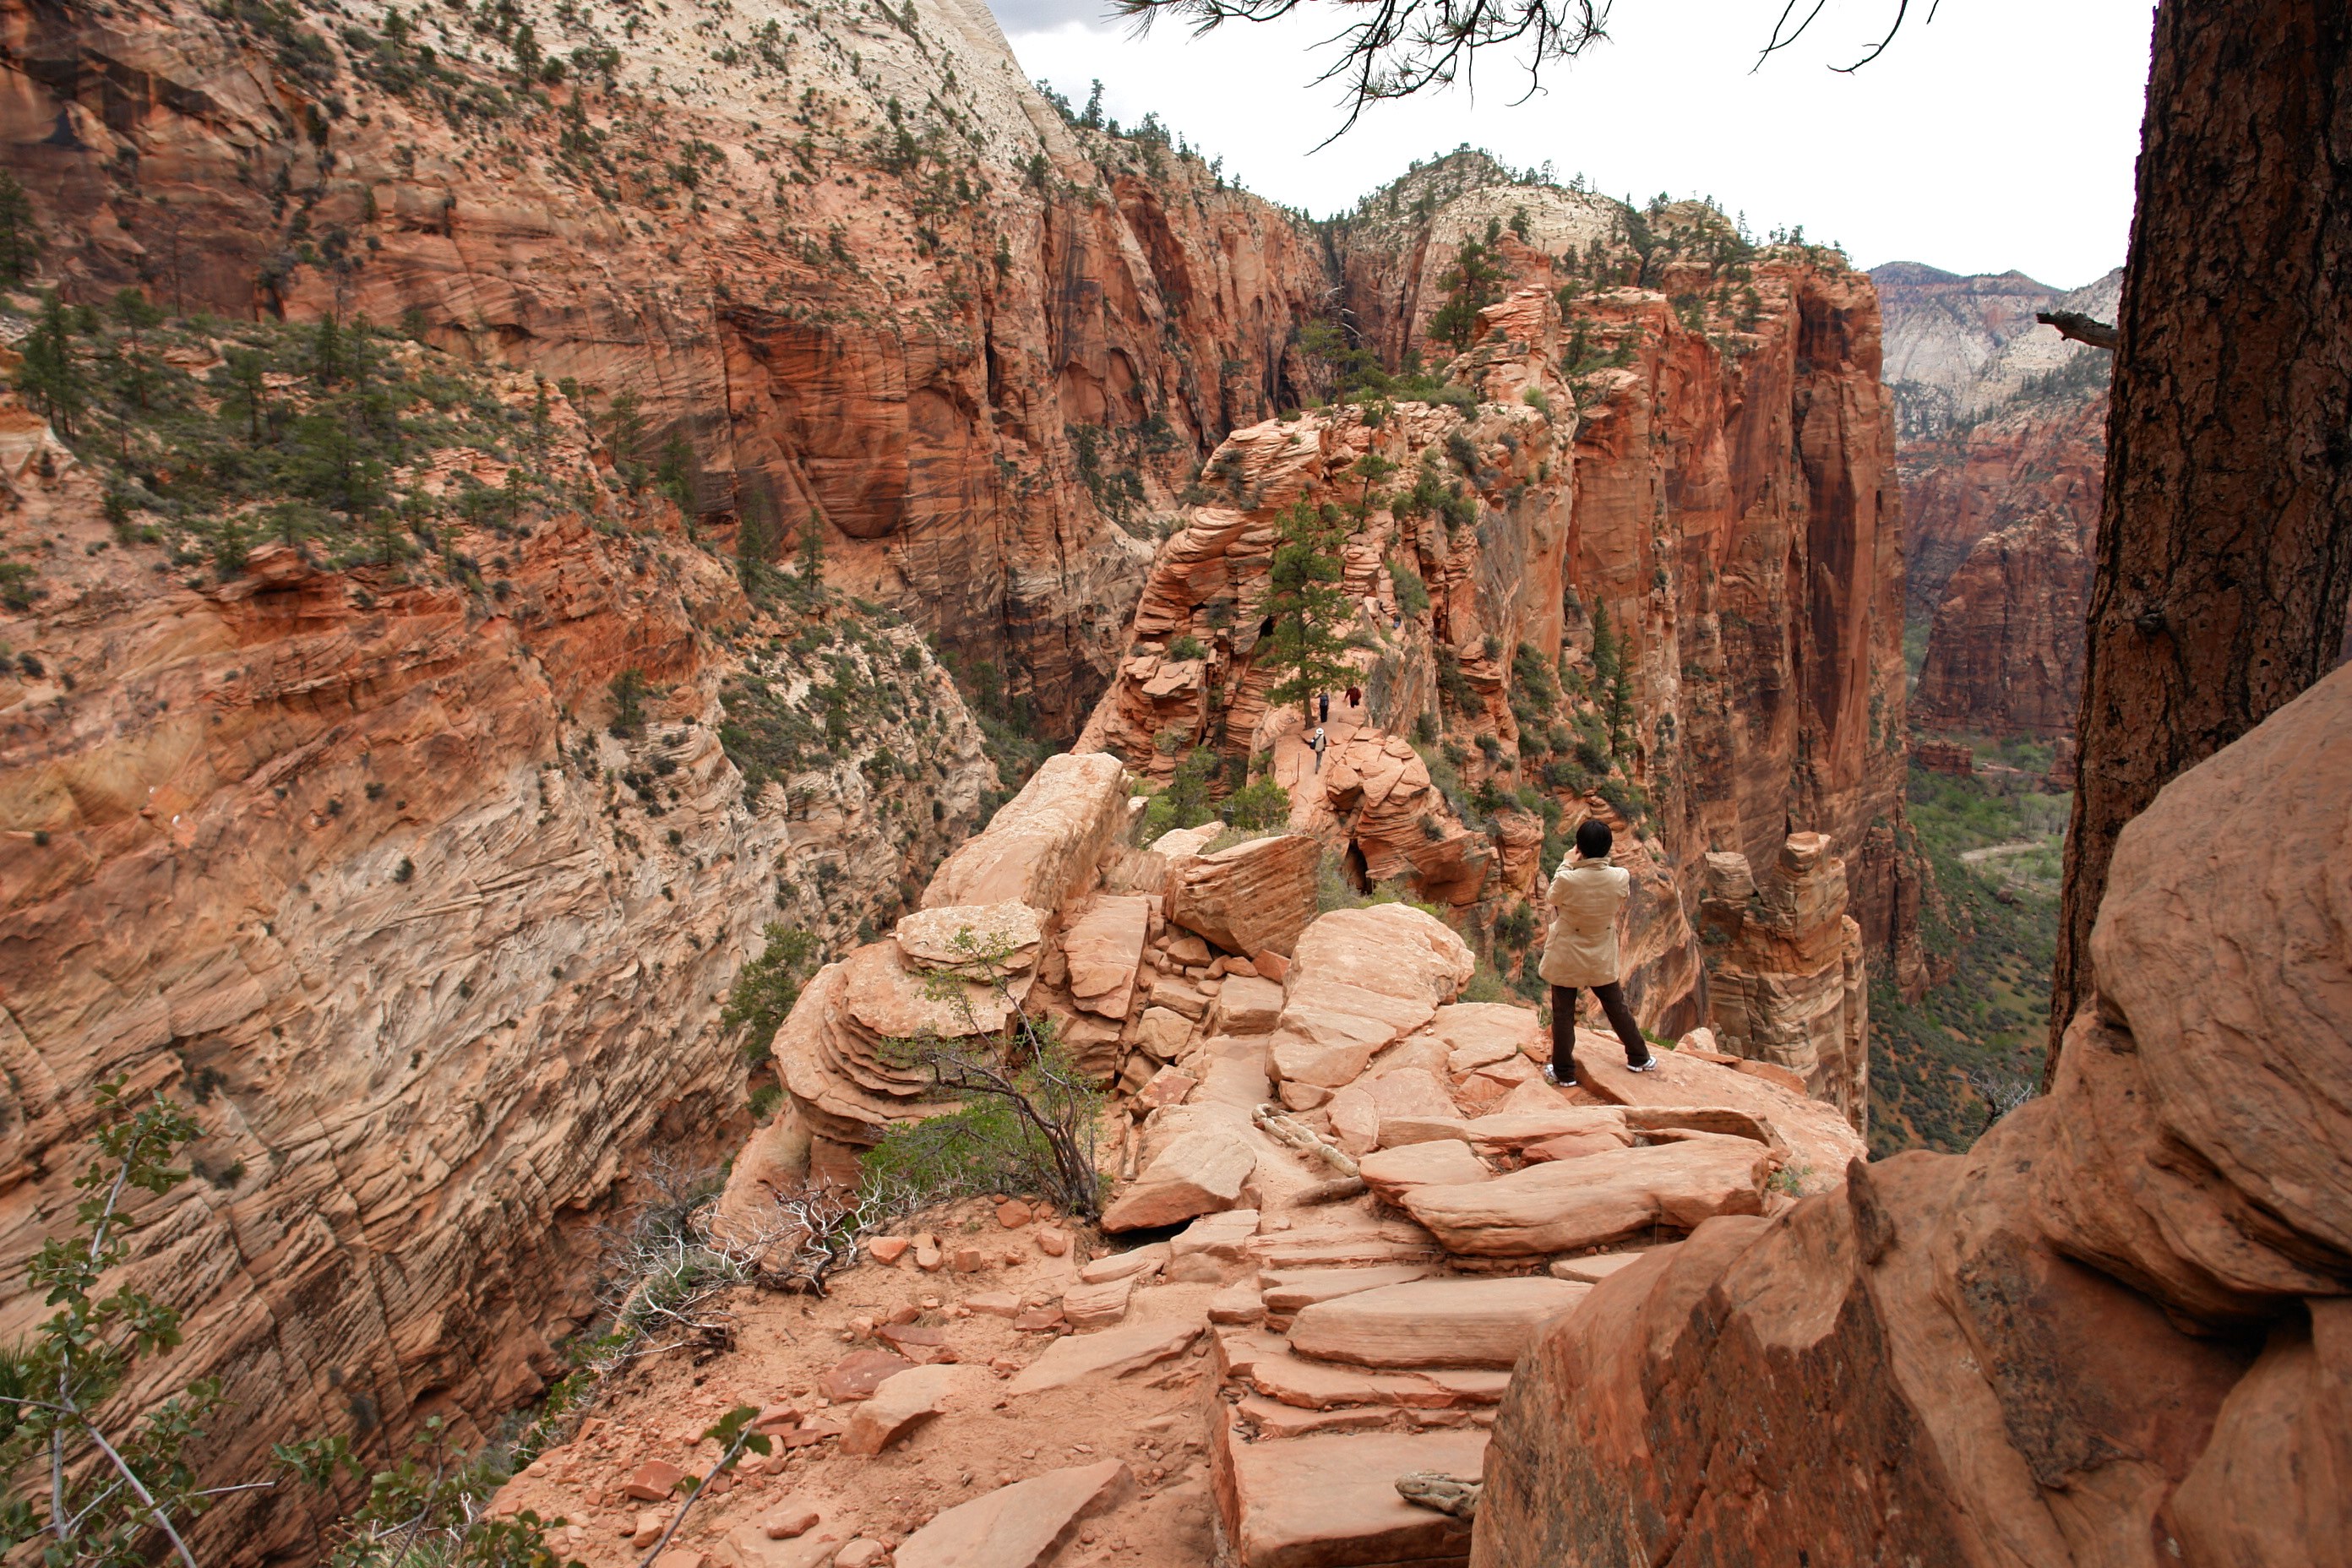 Update Hiker who died after fall in Zion National Park identified